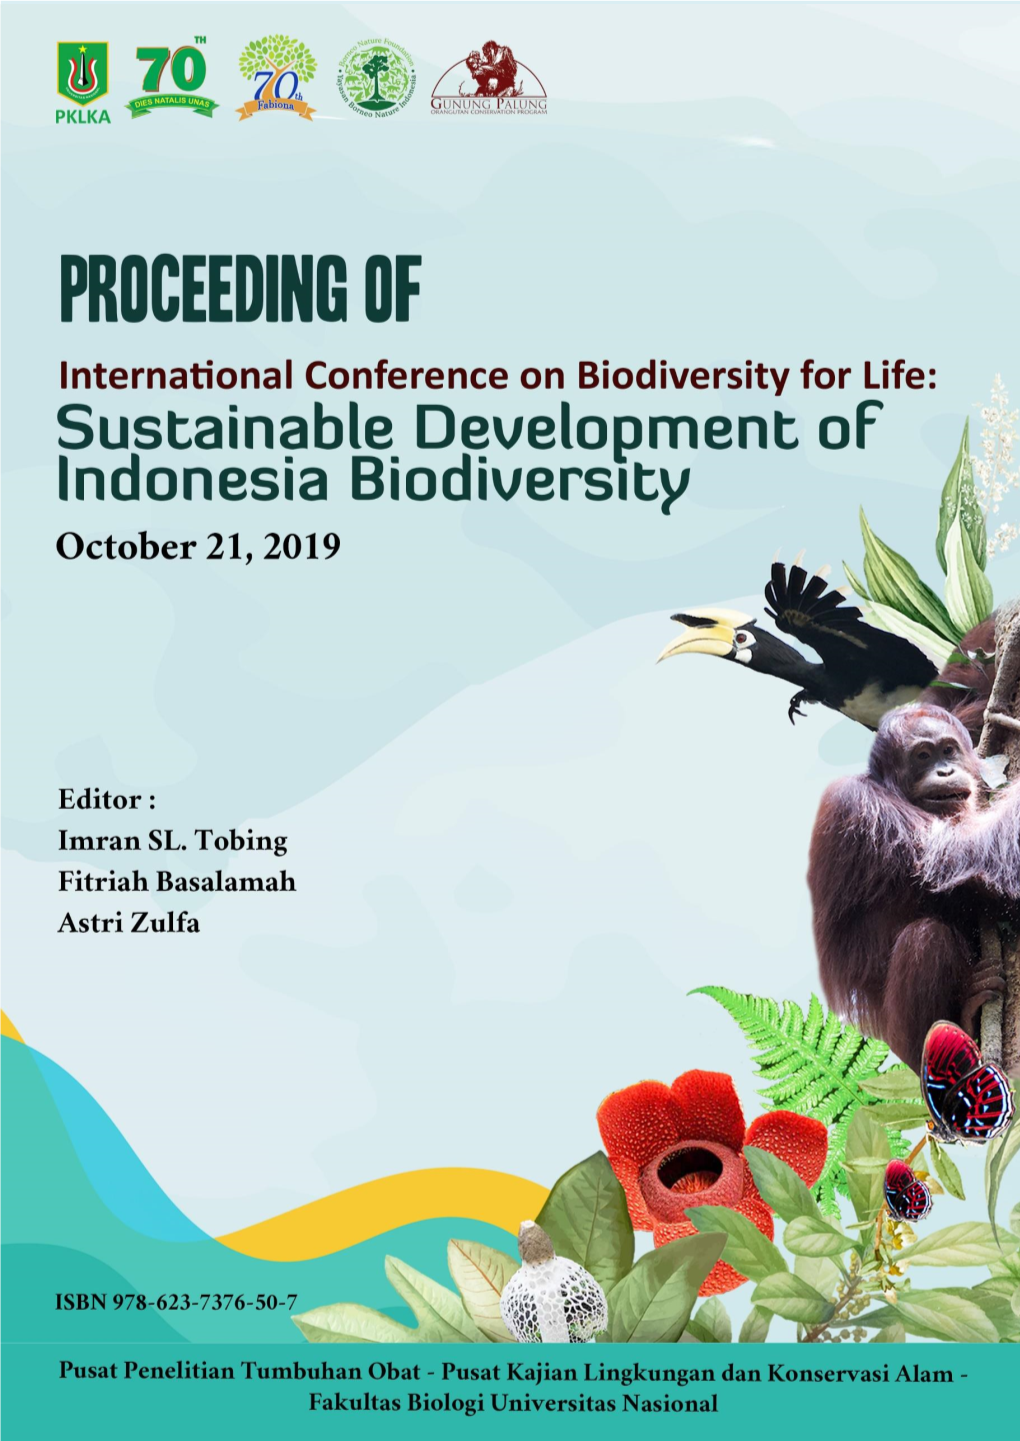 International Conference on Biodiversity for Life: SUISTANABLE DEVELOPMENT of INDONESIA BIODIVERSITY